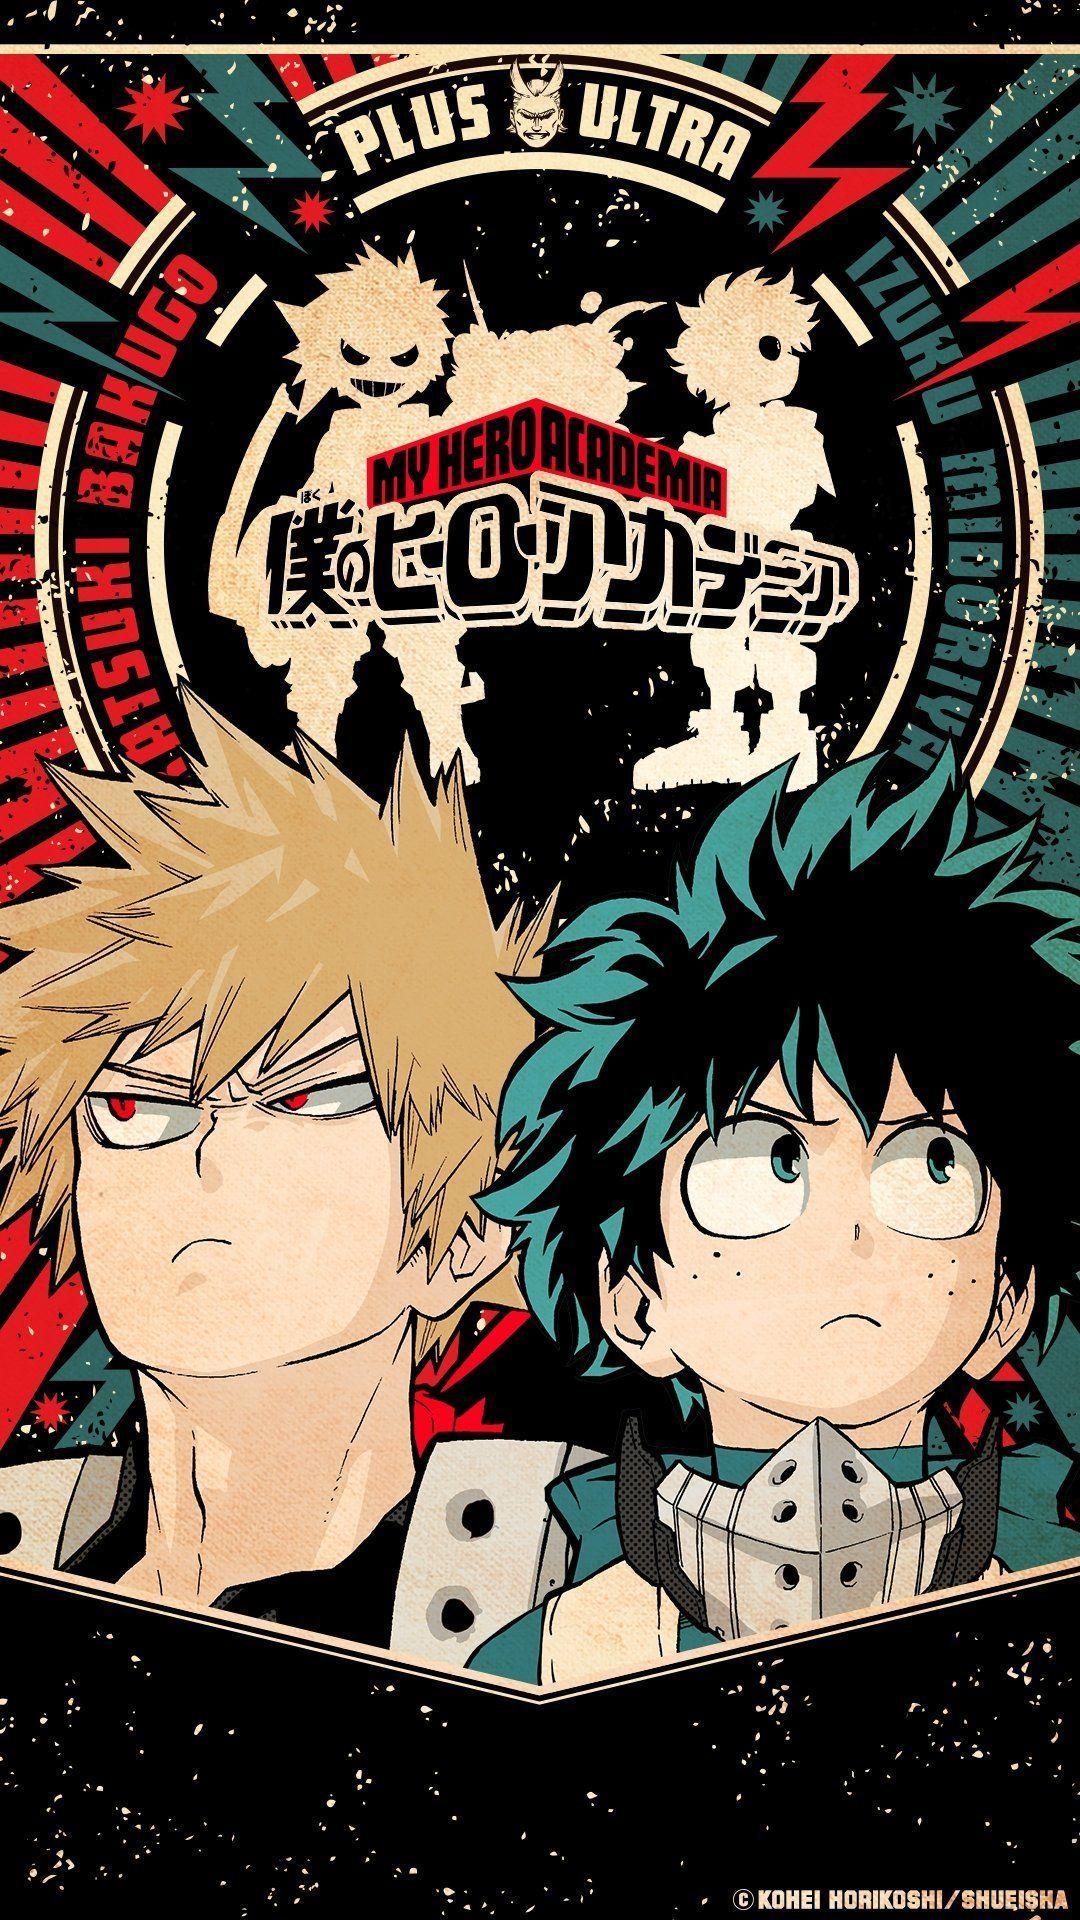 Color Division: The Background Of SHONEN JUMPs Official Bakudeku